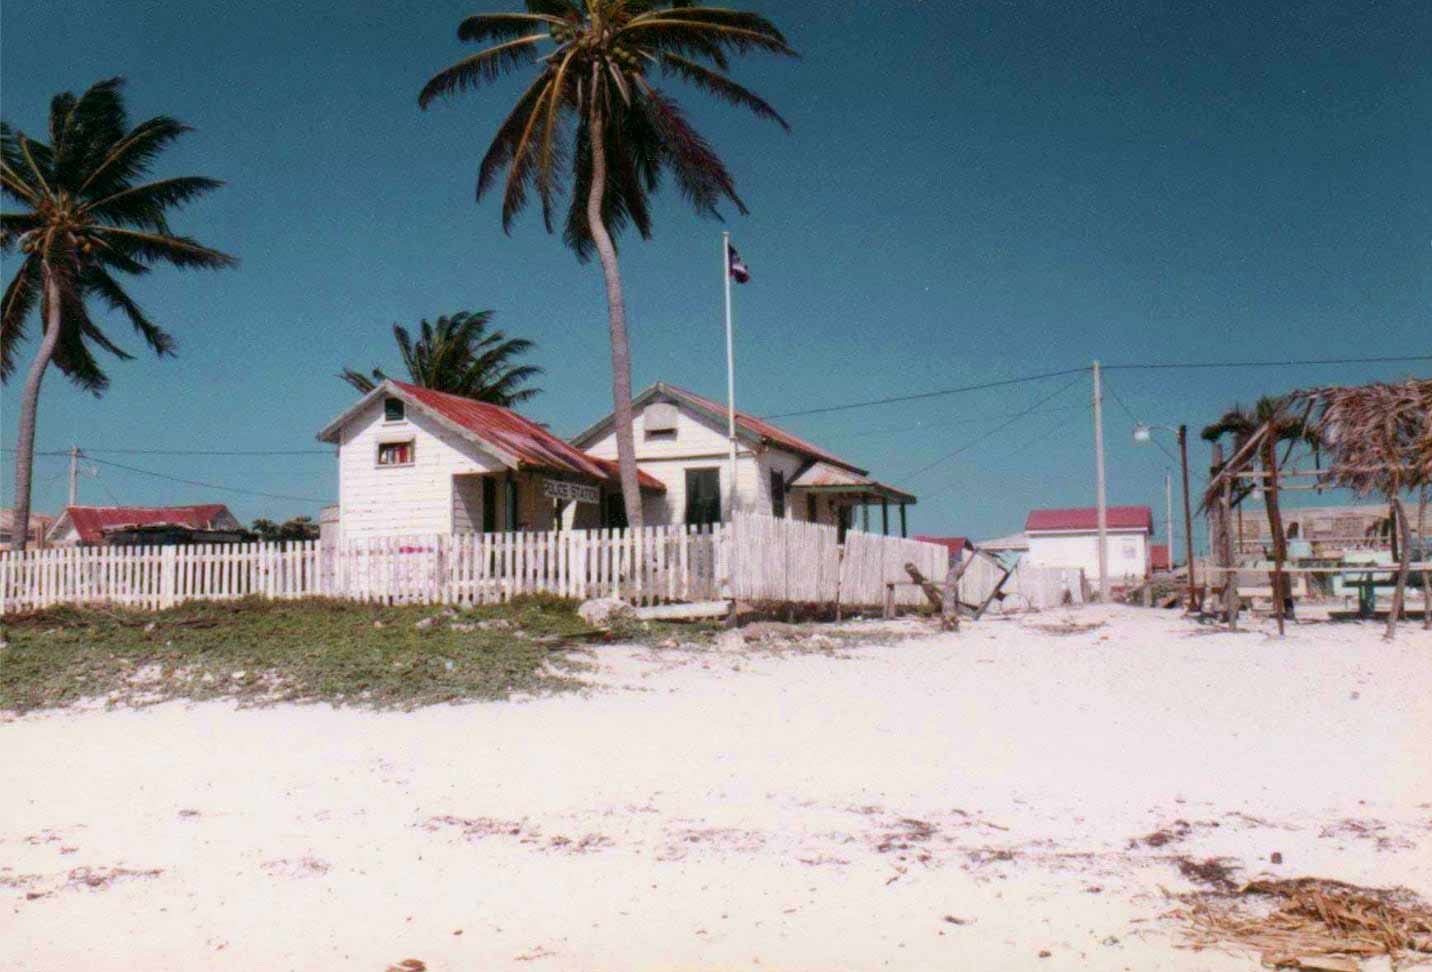 First Police station in San Pedro, 1975